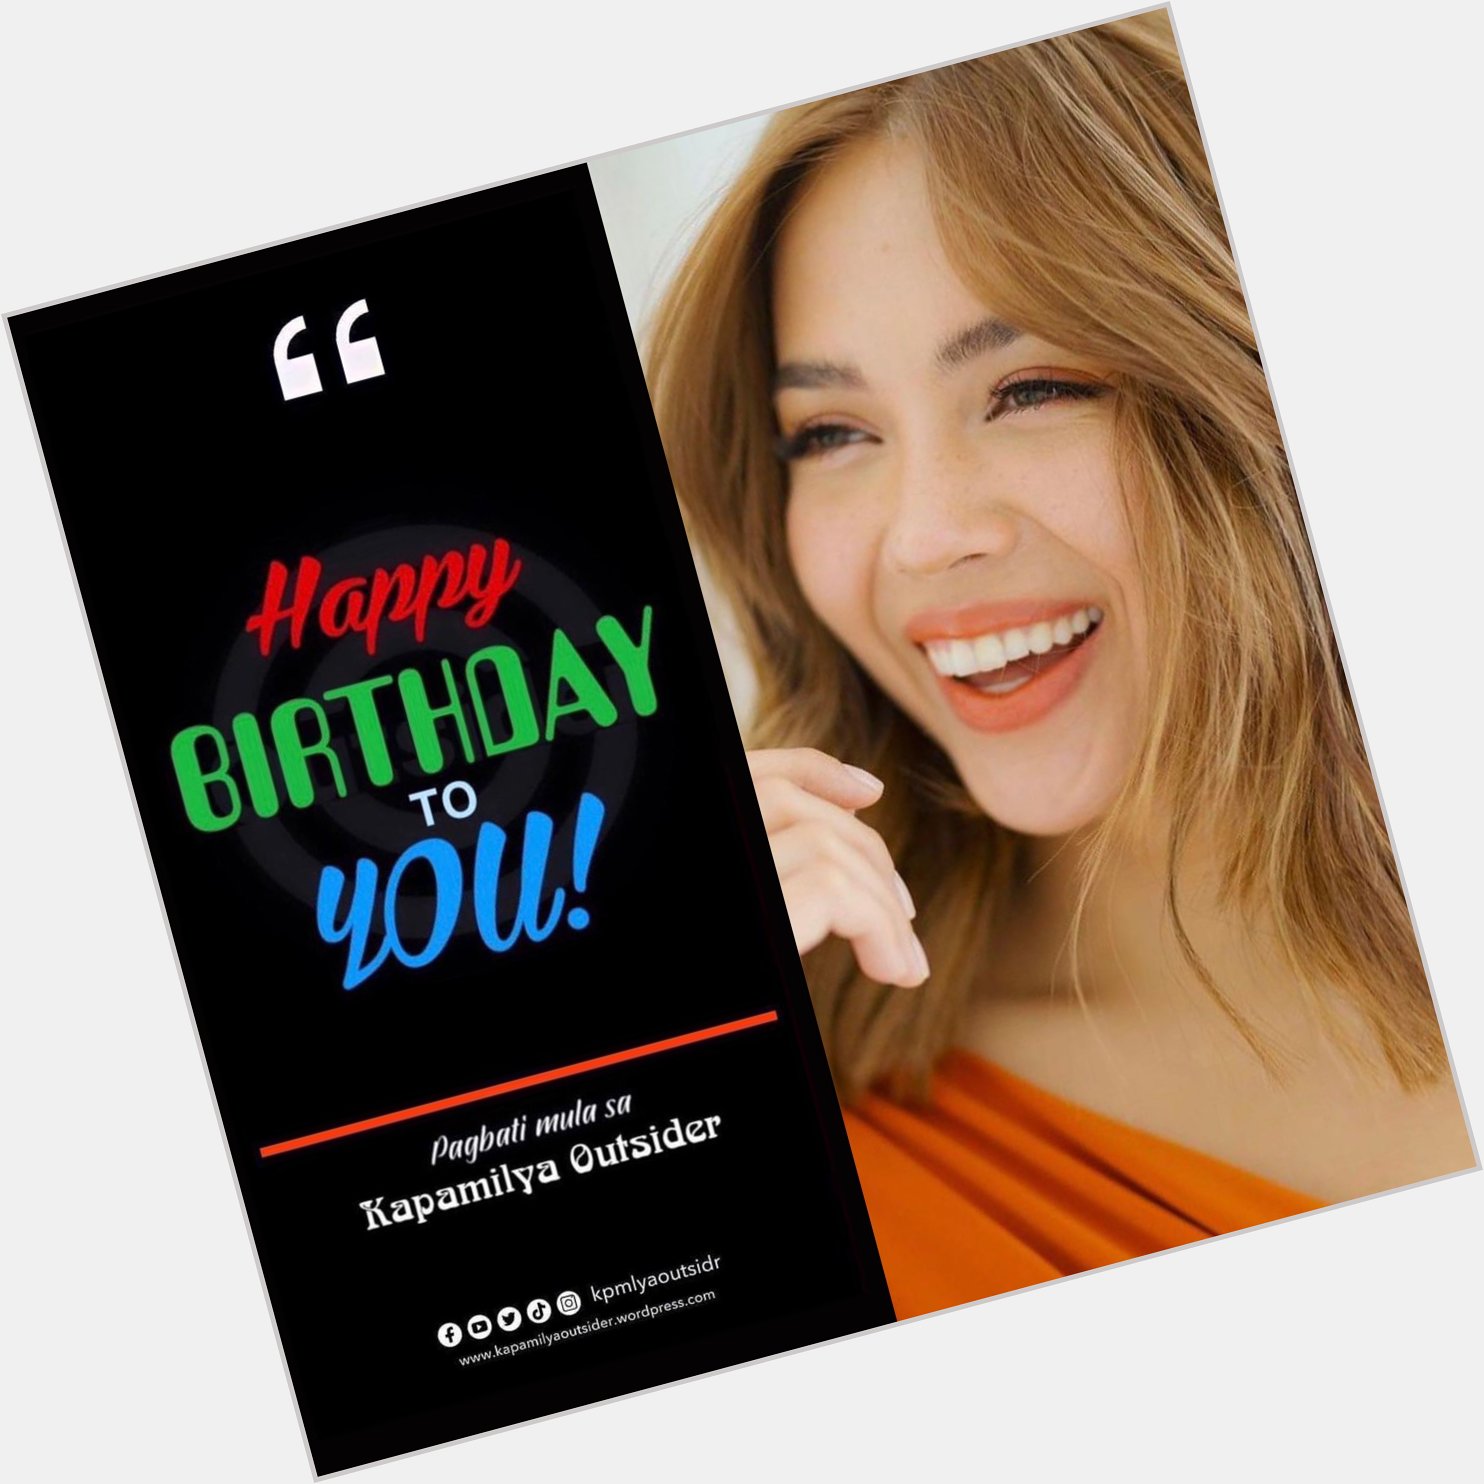 Here s to another year filled with genuine happiness and great surprises Happy birthday, Julia Montes! 